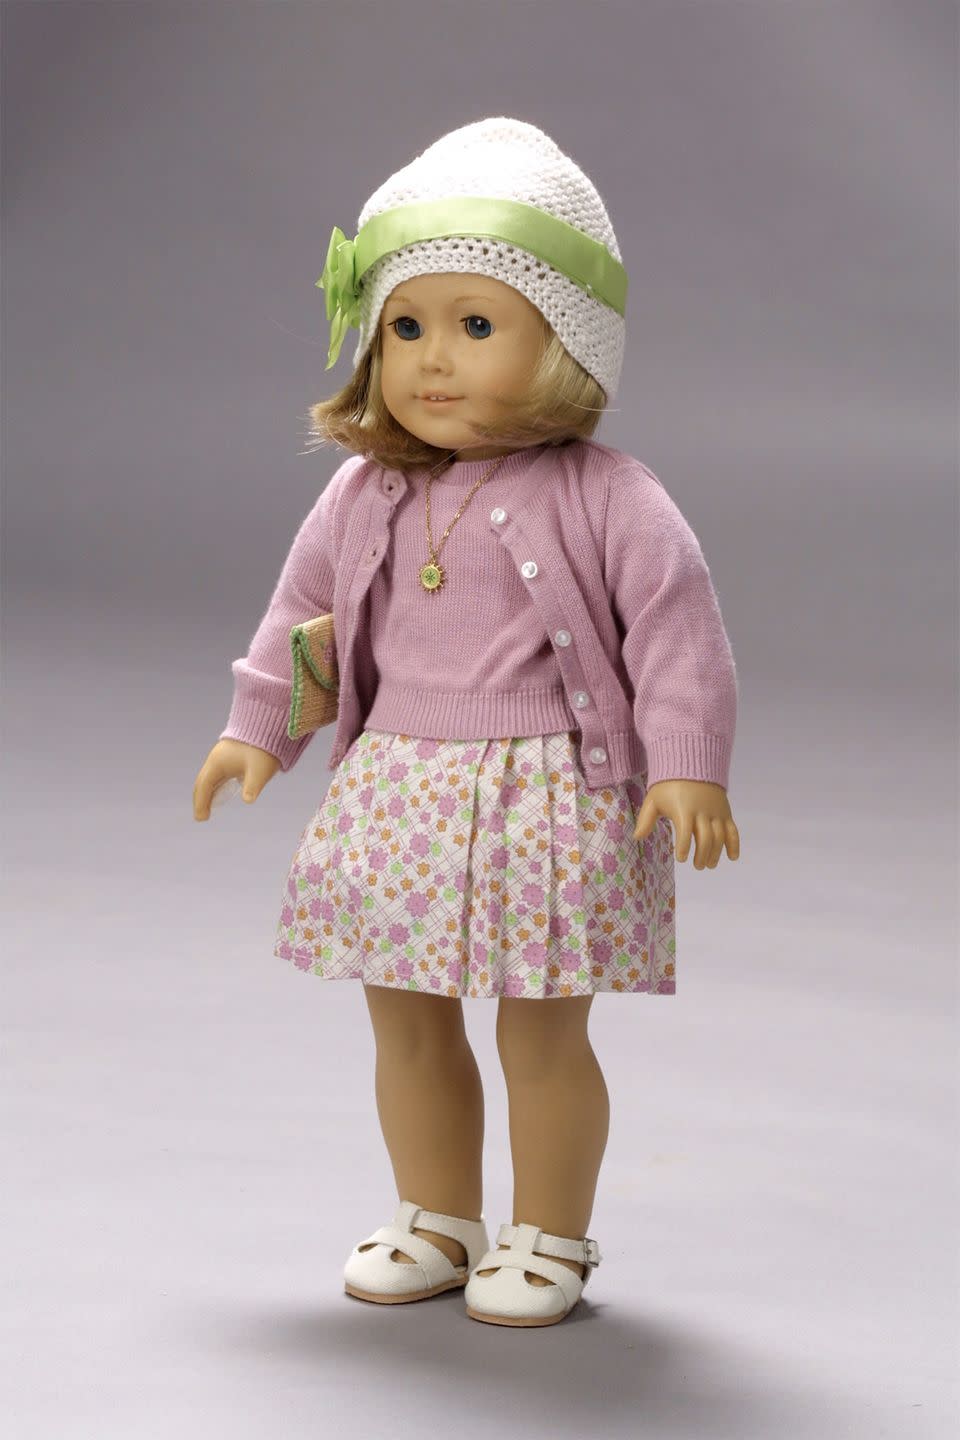 4) But American Girl saw almost immediate success.